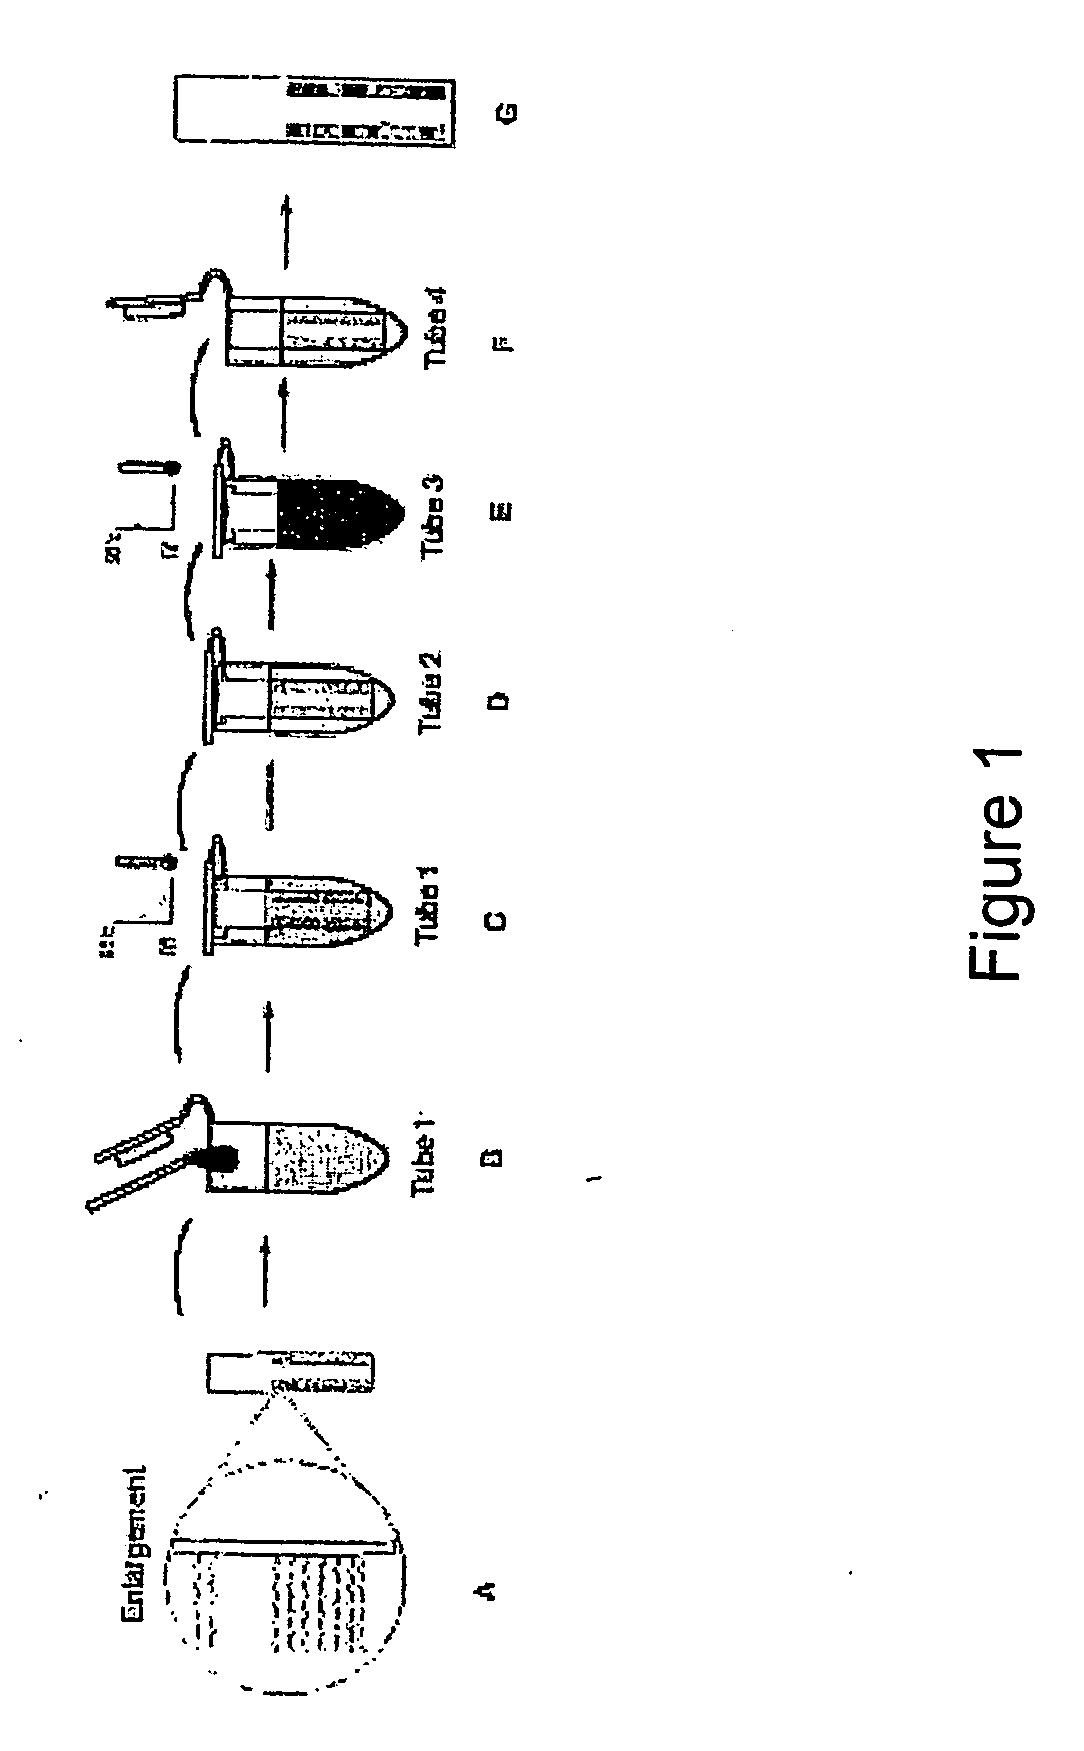 System for detecting polynucleotides